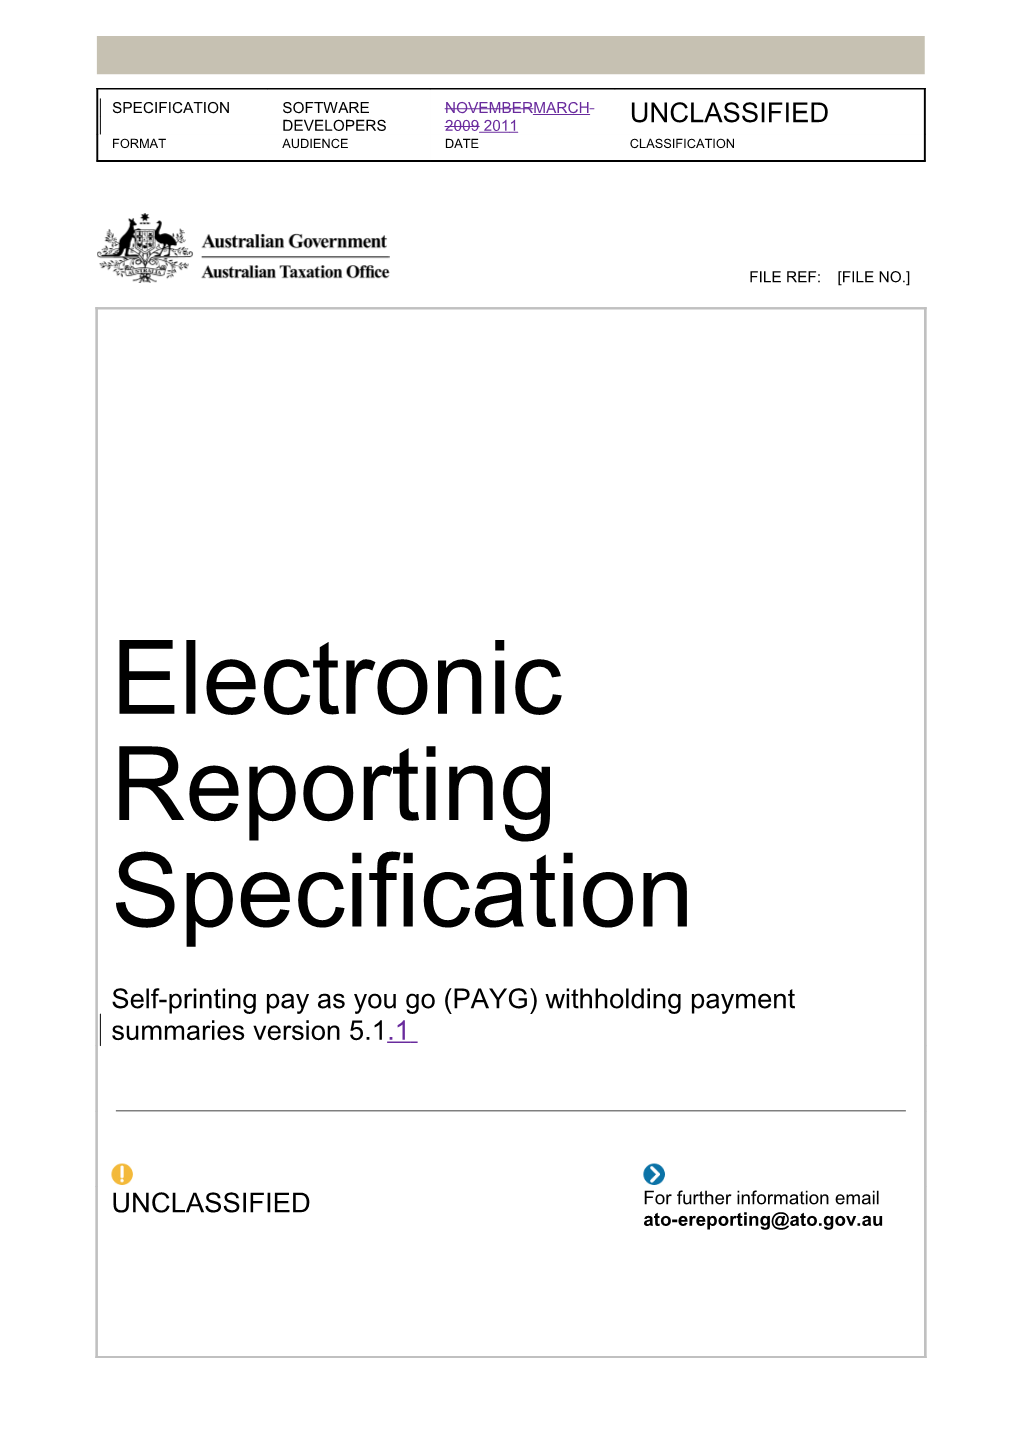 ELECTRONIC REPORTING SPECIFICATION Self-Printing Pay As You Go (PAYG) Withholding Payment